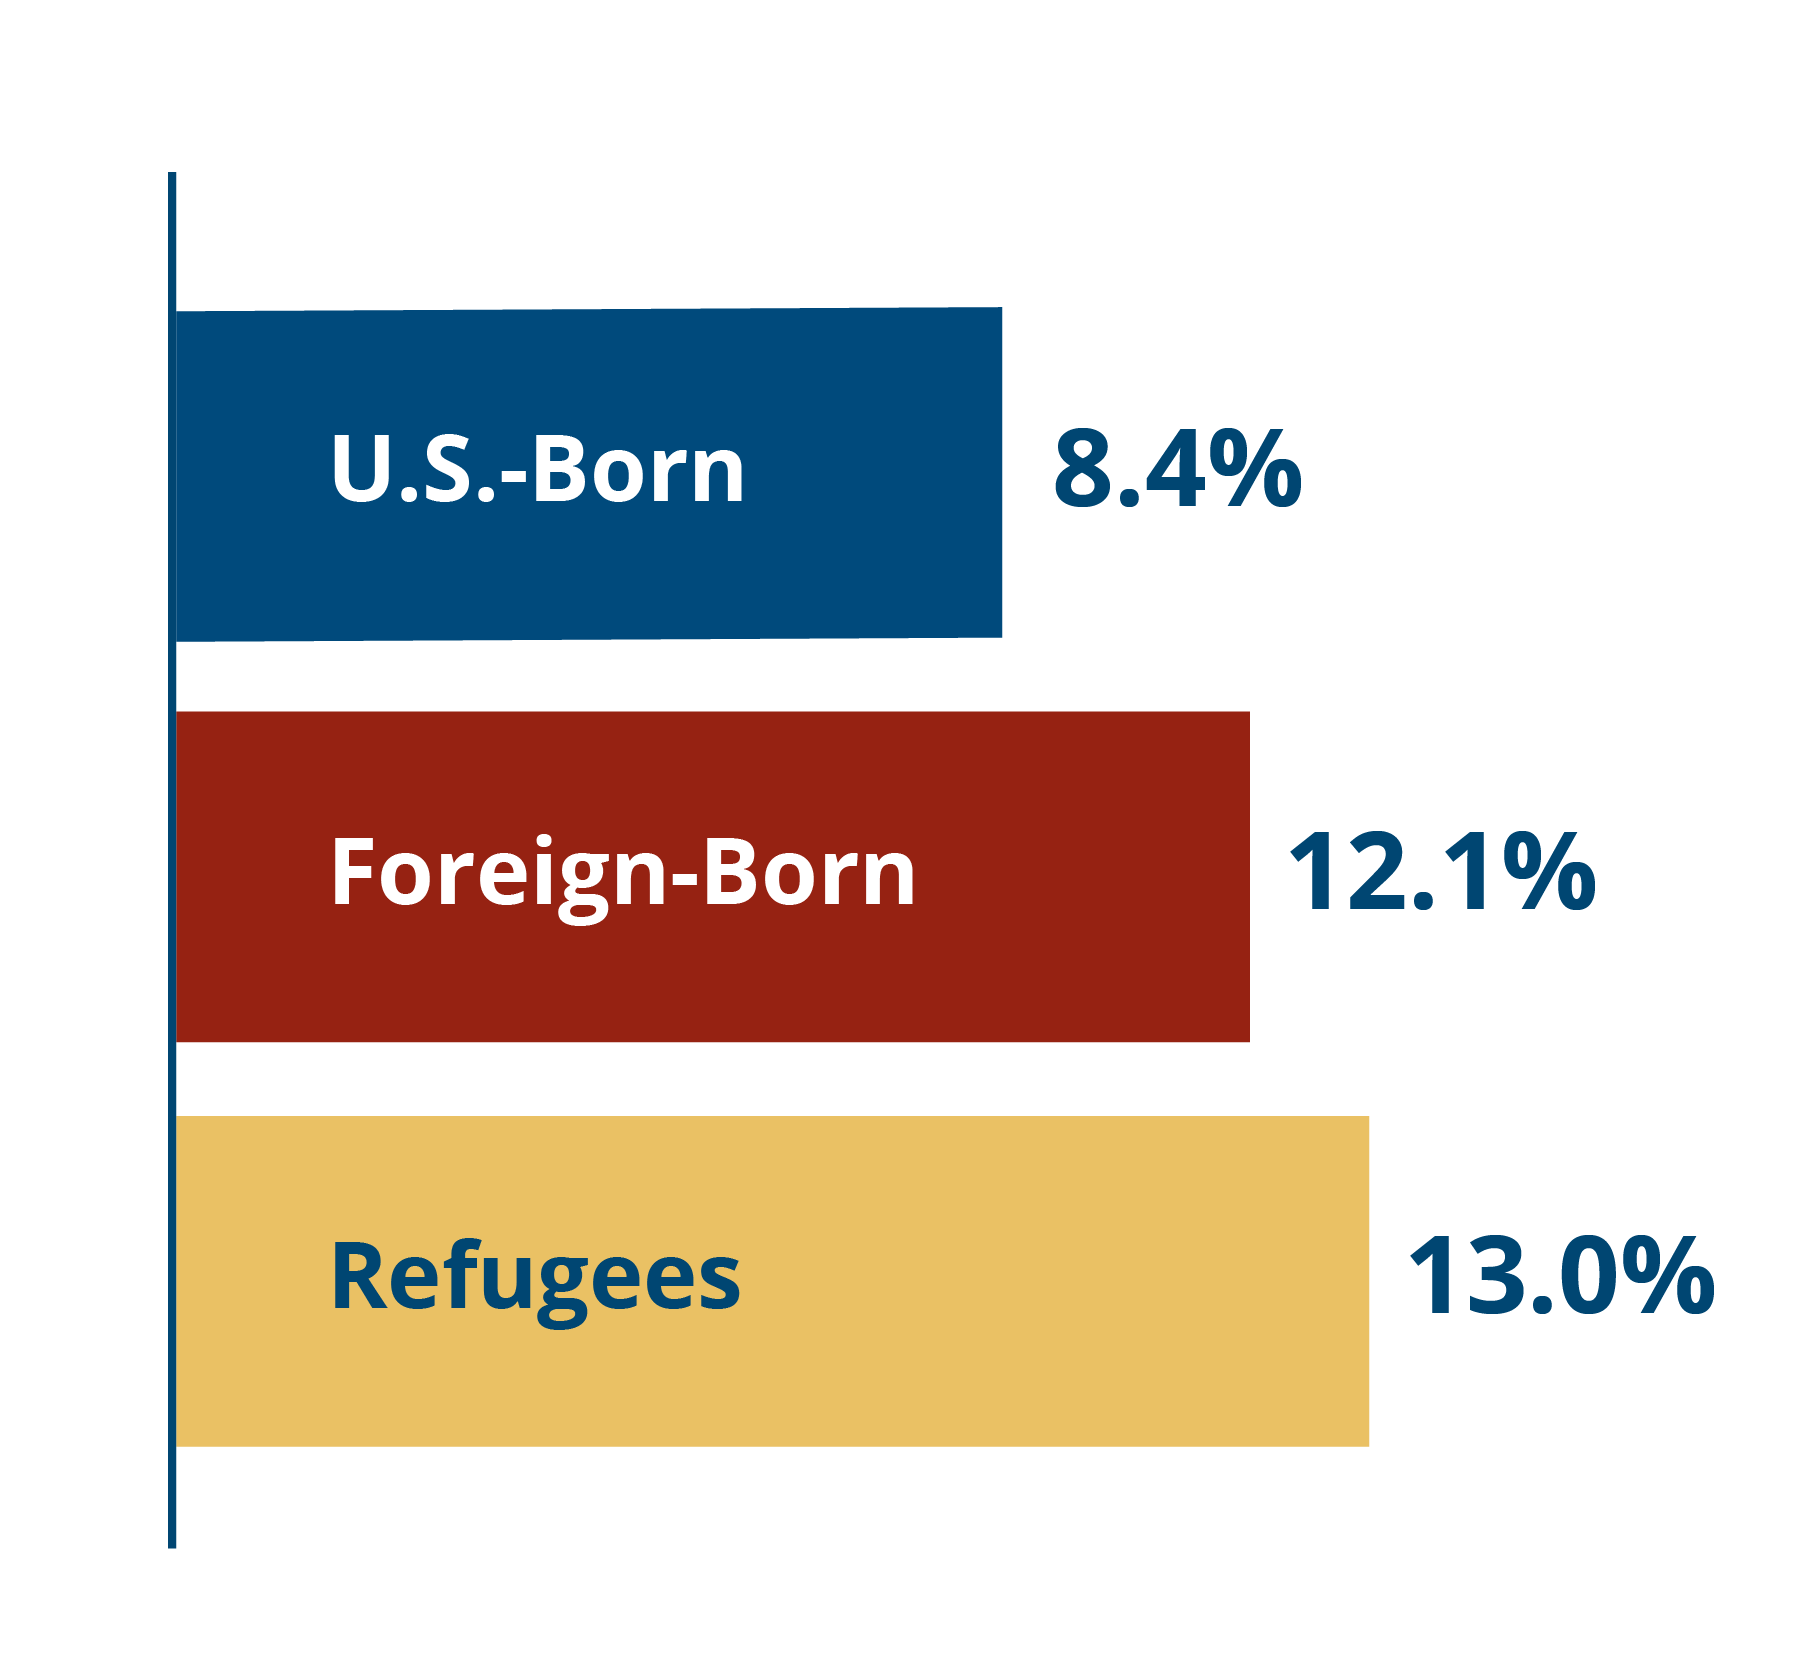 Self-employment rates are 8.4% for U.S.-born residents, 12.1% for immigrants, and 13.0% for refugees.